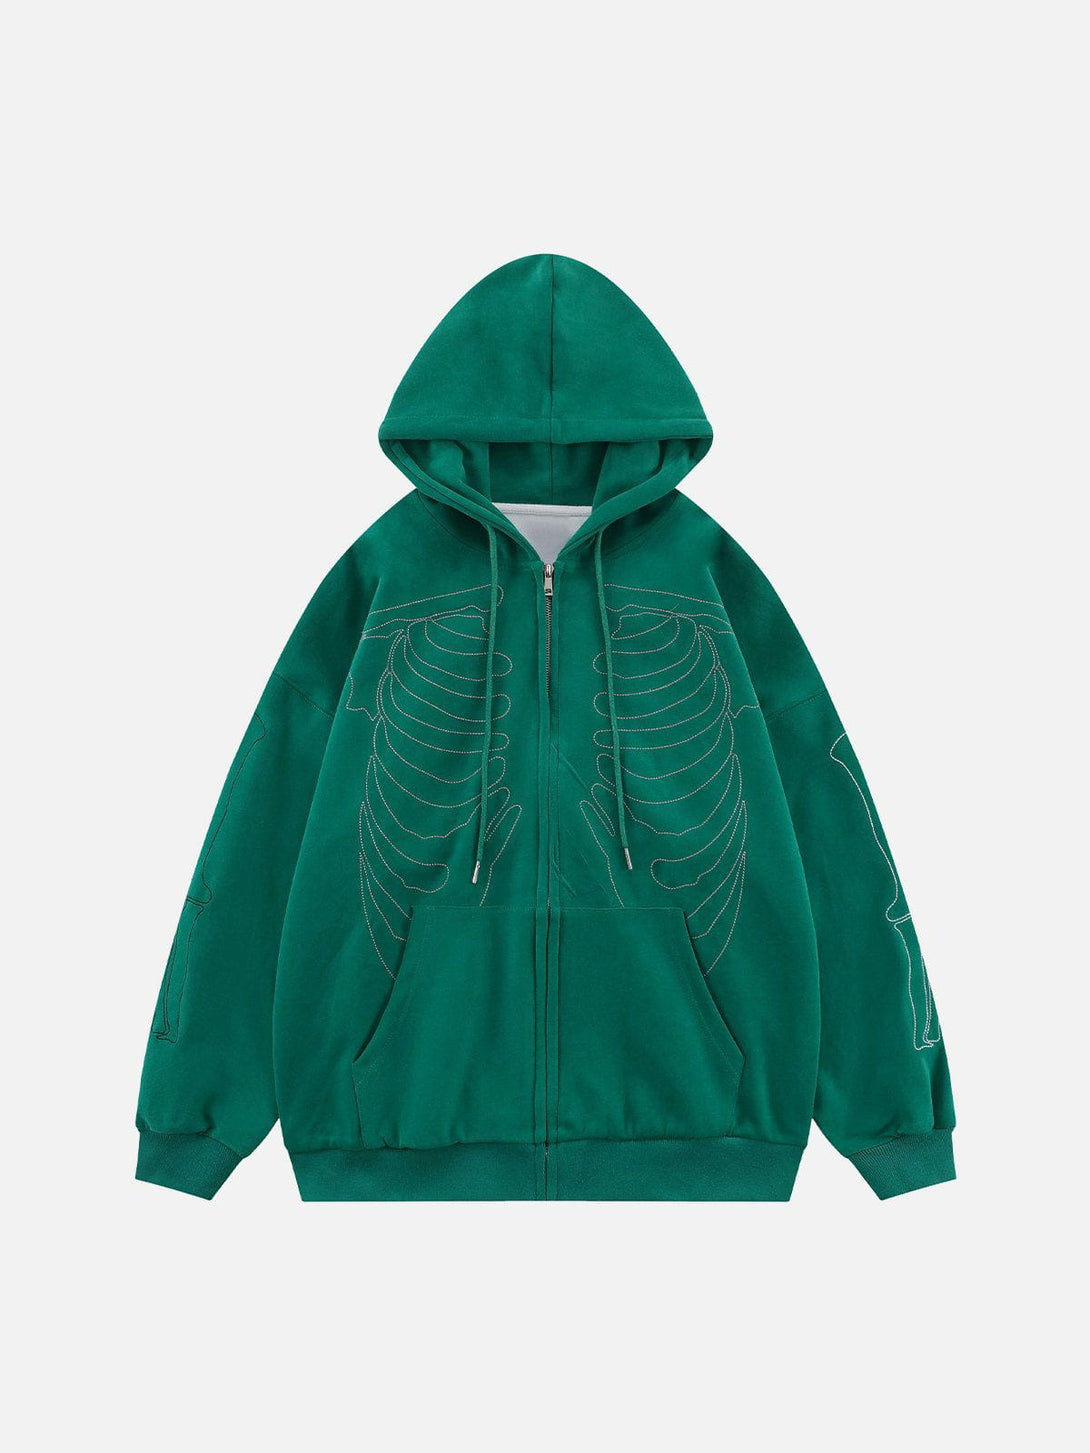 Levefly - Embroidery Skeleton Zip Up Hoodie - Streetwear Fashion - levefly.com